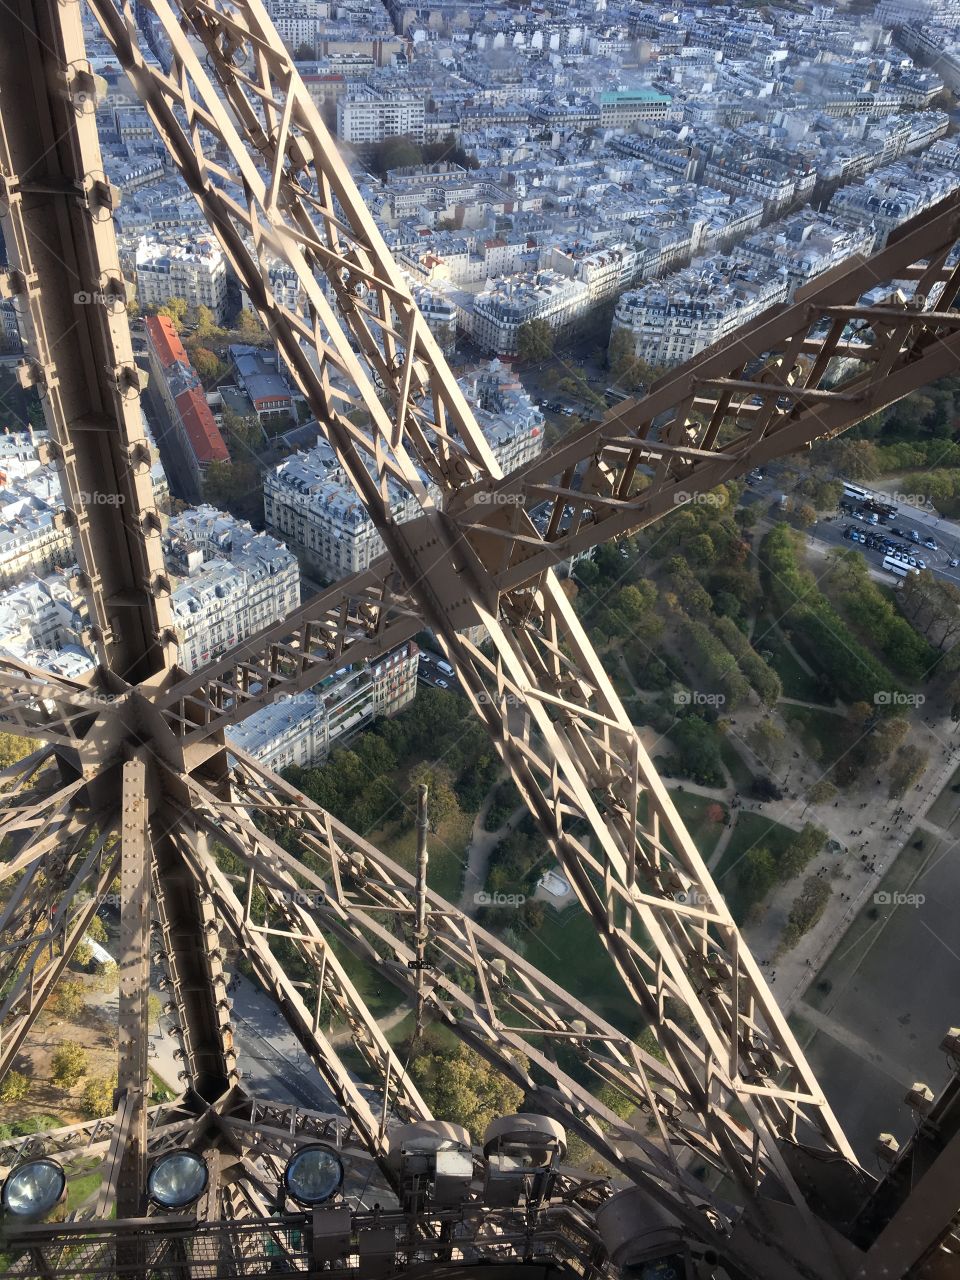 View from the elevator on Eiffel tower